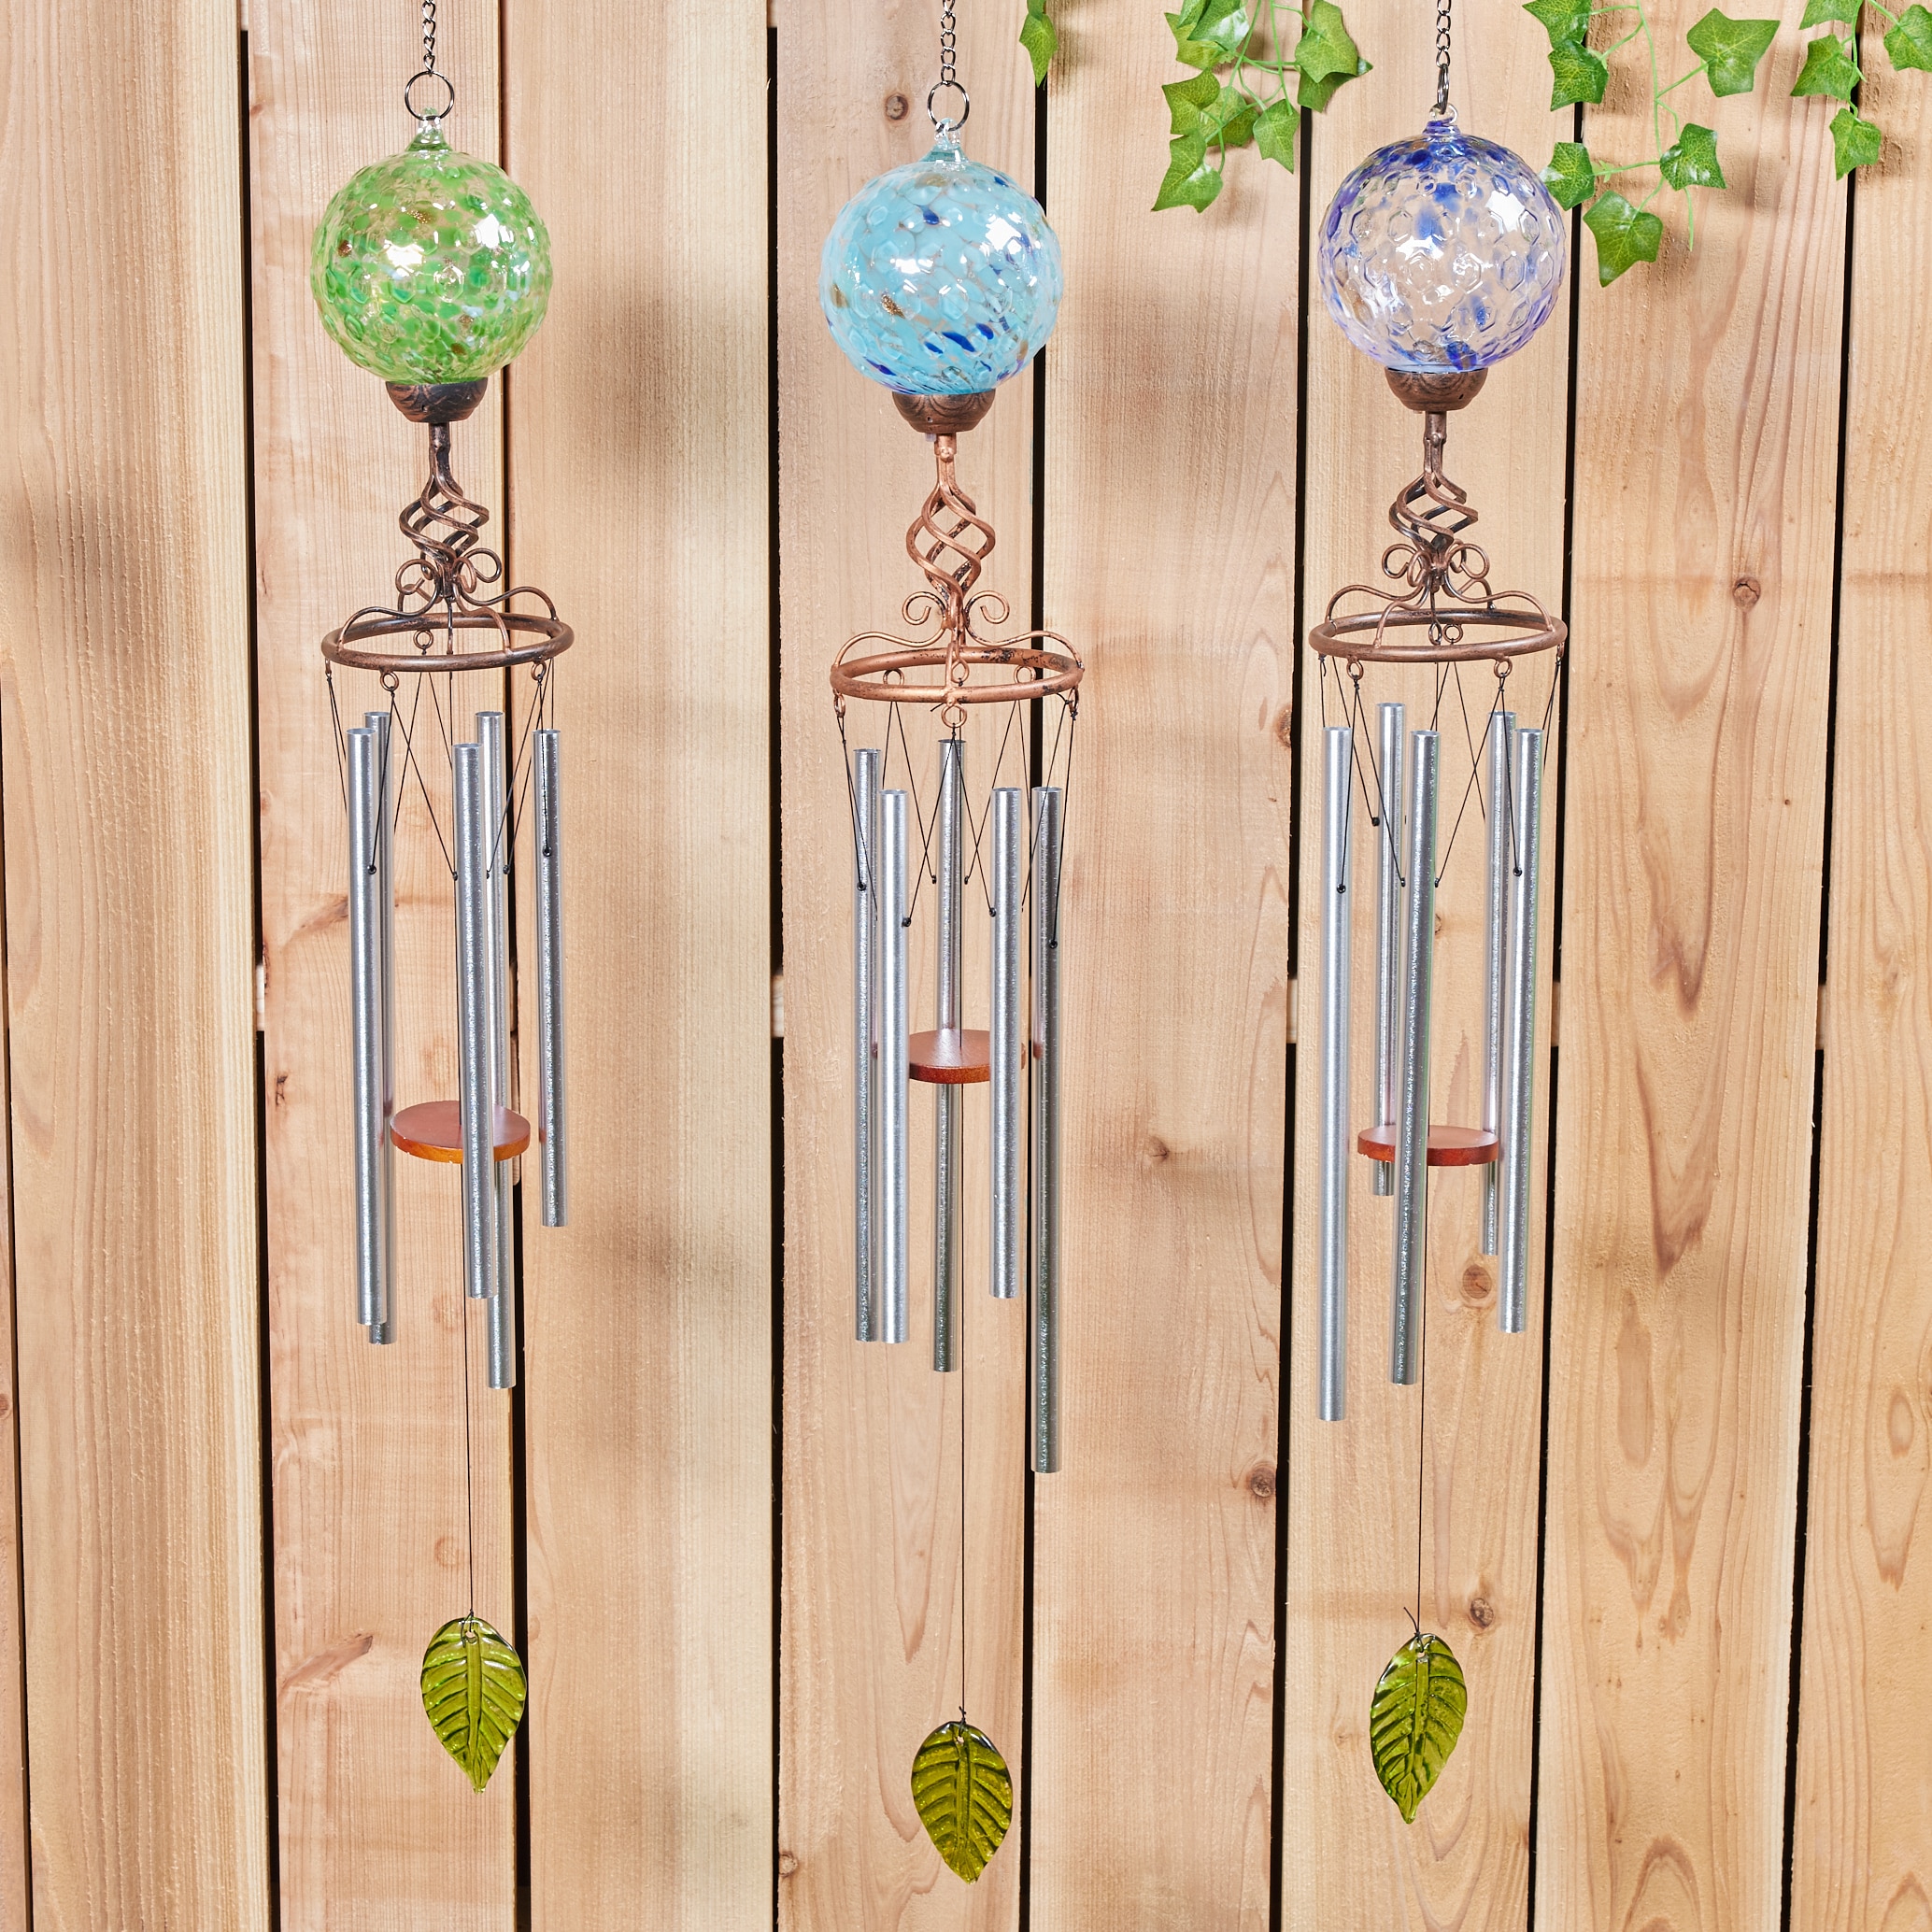 Wind Chime Parts for Sale in Lake Worth, FL - OfferUp